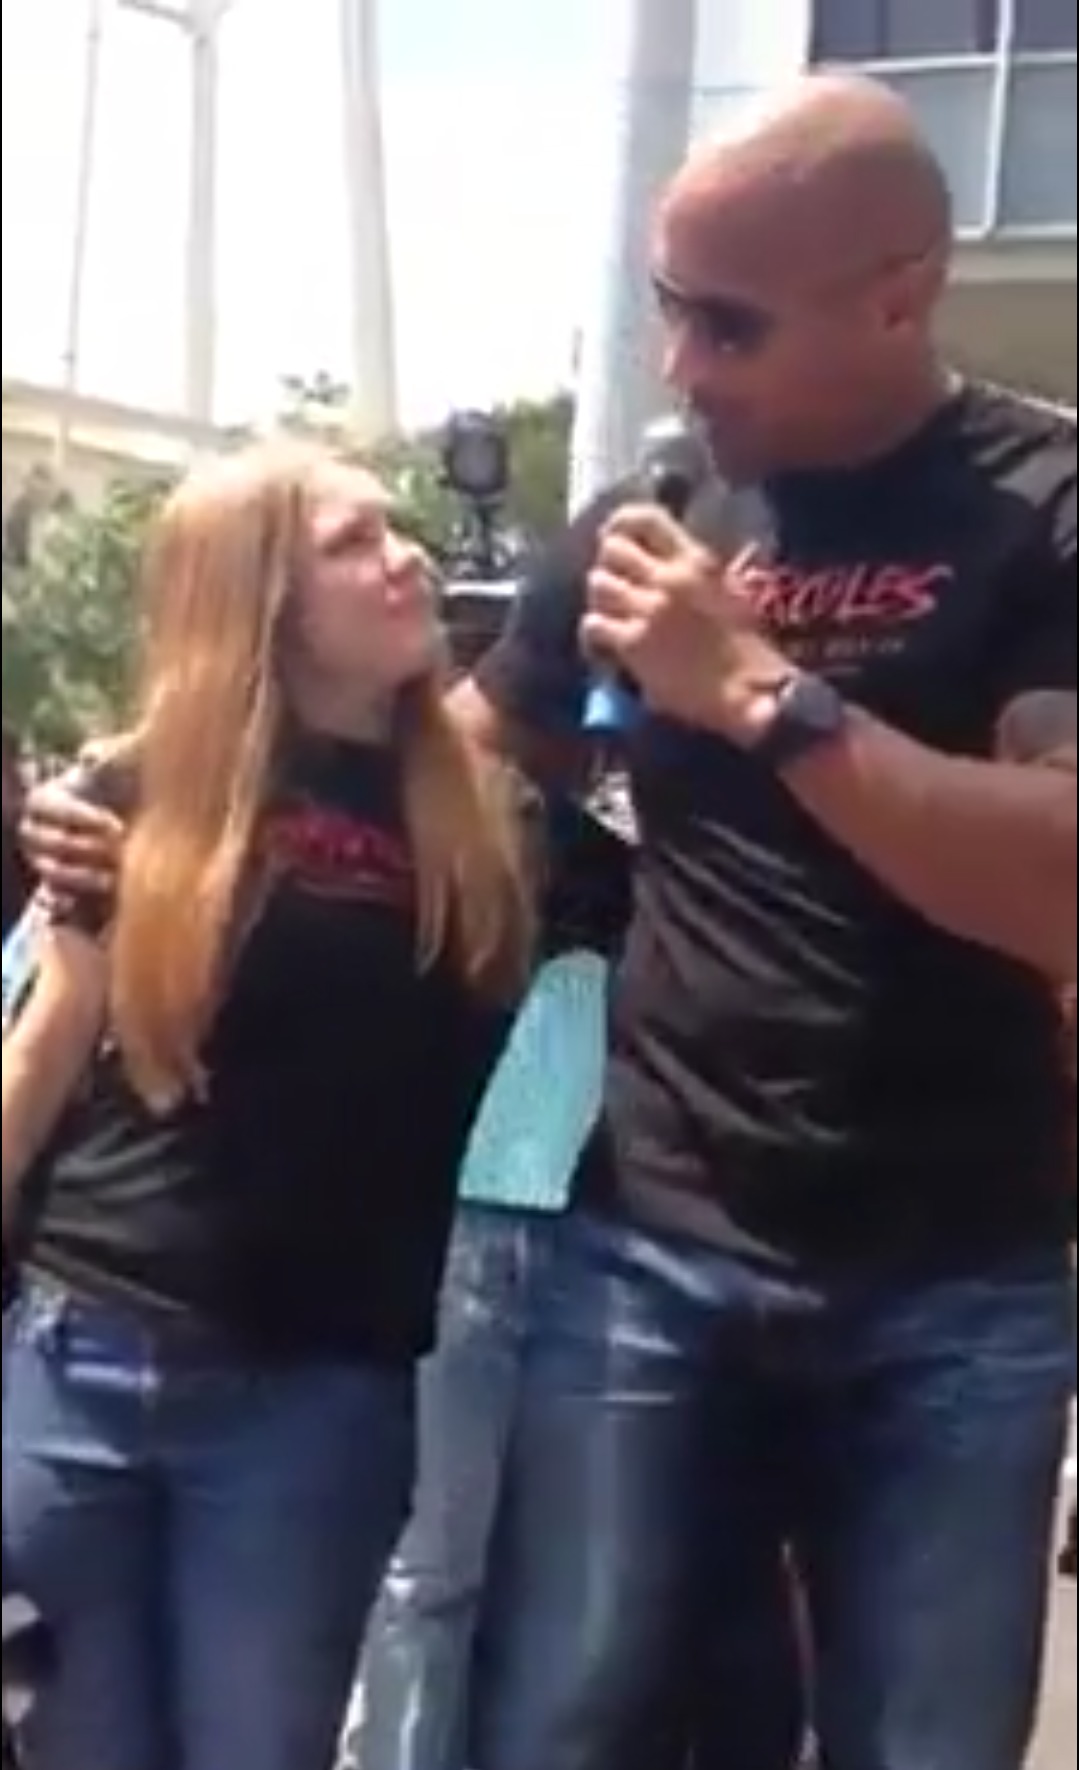 Annabelle Roberts and Dwayne Johnson (The Rock) at Paramount Studios on July 16, 2014 filming a promo for the movie 